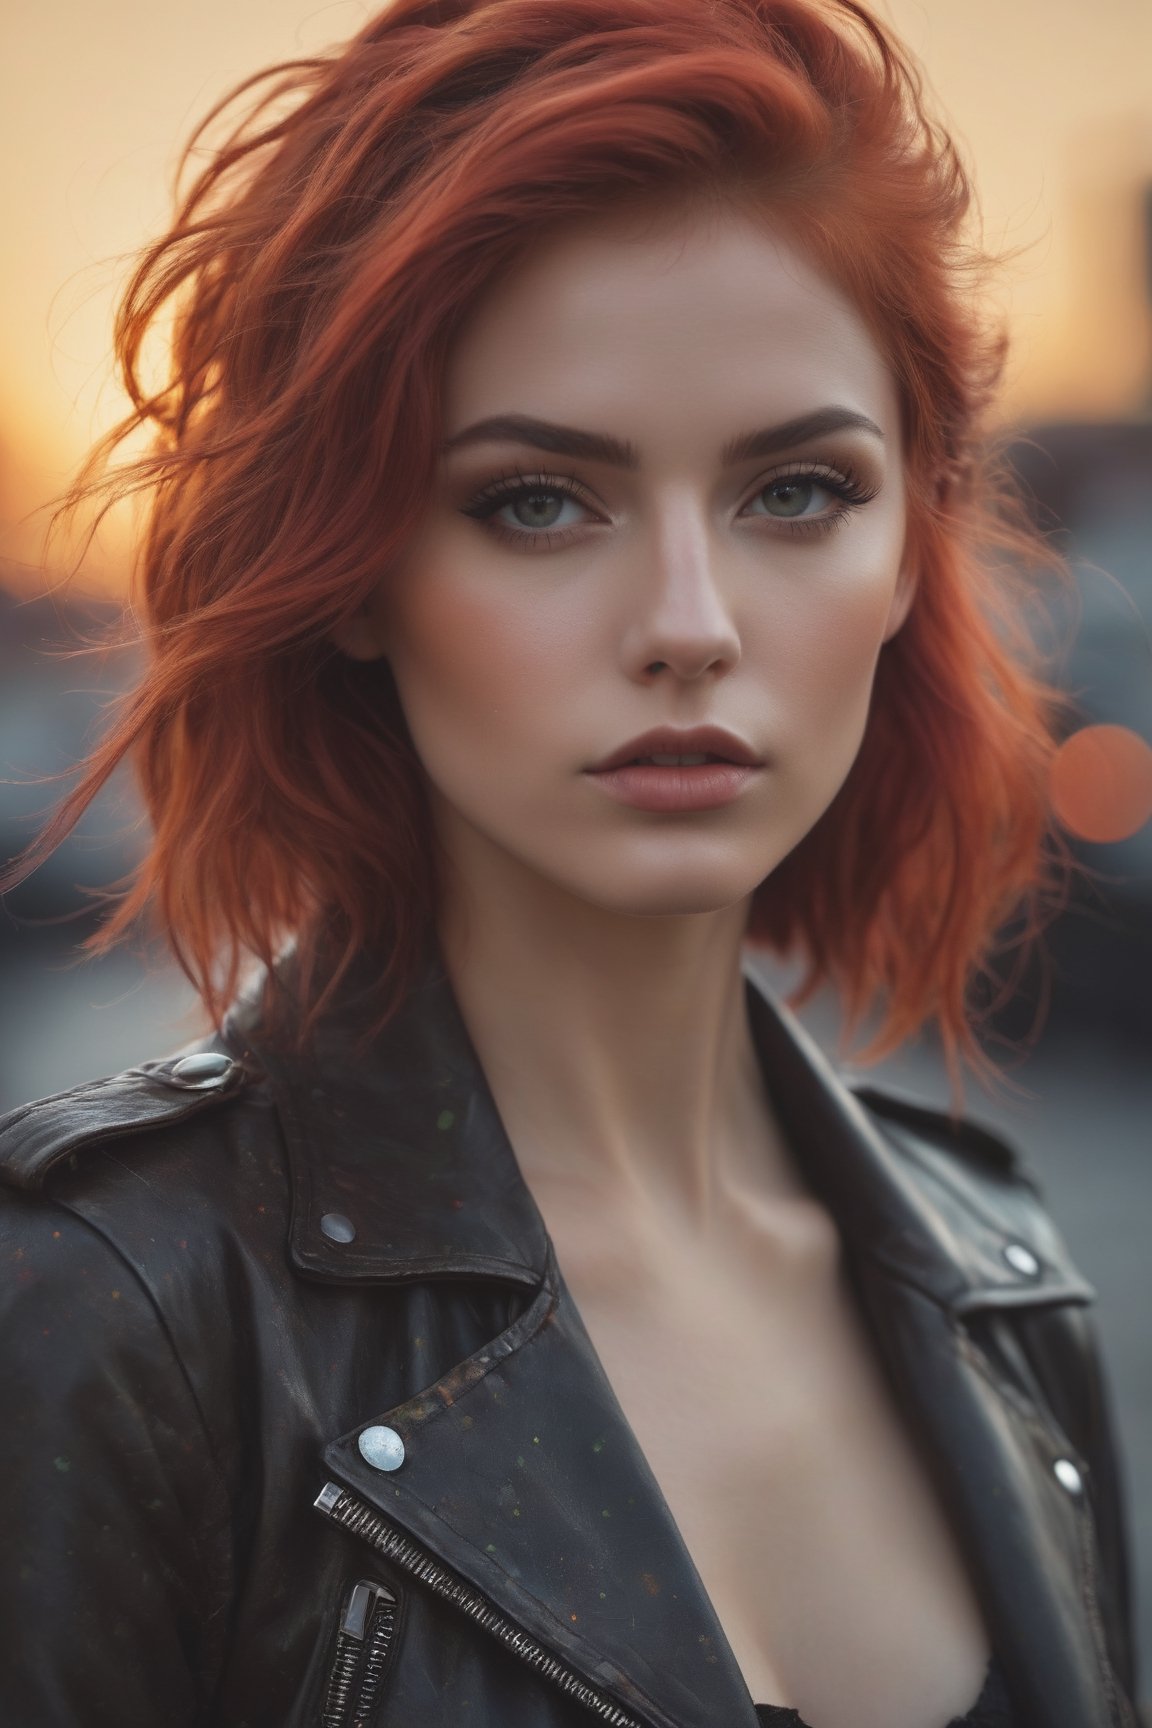 raw realistic/ima/imagine elf mspy girl with red speckle hair and leather jacket, in the style of jessica drossin, sun-kissed palettes, michael malm, luminous skies, city portraits, david nordahl, hyperrealistic animal portraits - hyperbole, leather/hide, exaggerated facil features  
grainy cinematic,  godlyphoto r3al,detailmaster2,aesthetic portrait, cinematic colors, earthy , moody,  look , grainy cinematic, fantasy vibes  godlyphoto r3al,detailmaster2,aesthetic portrait, cinematic colors, earthy , moody,  